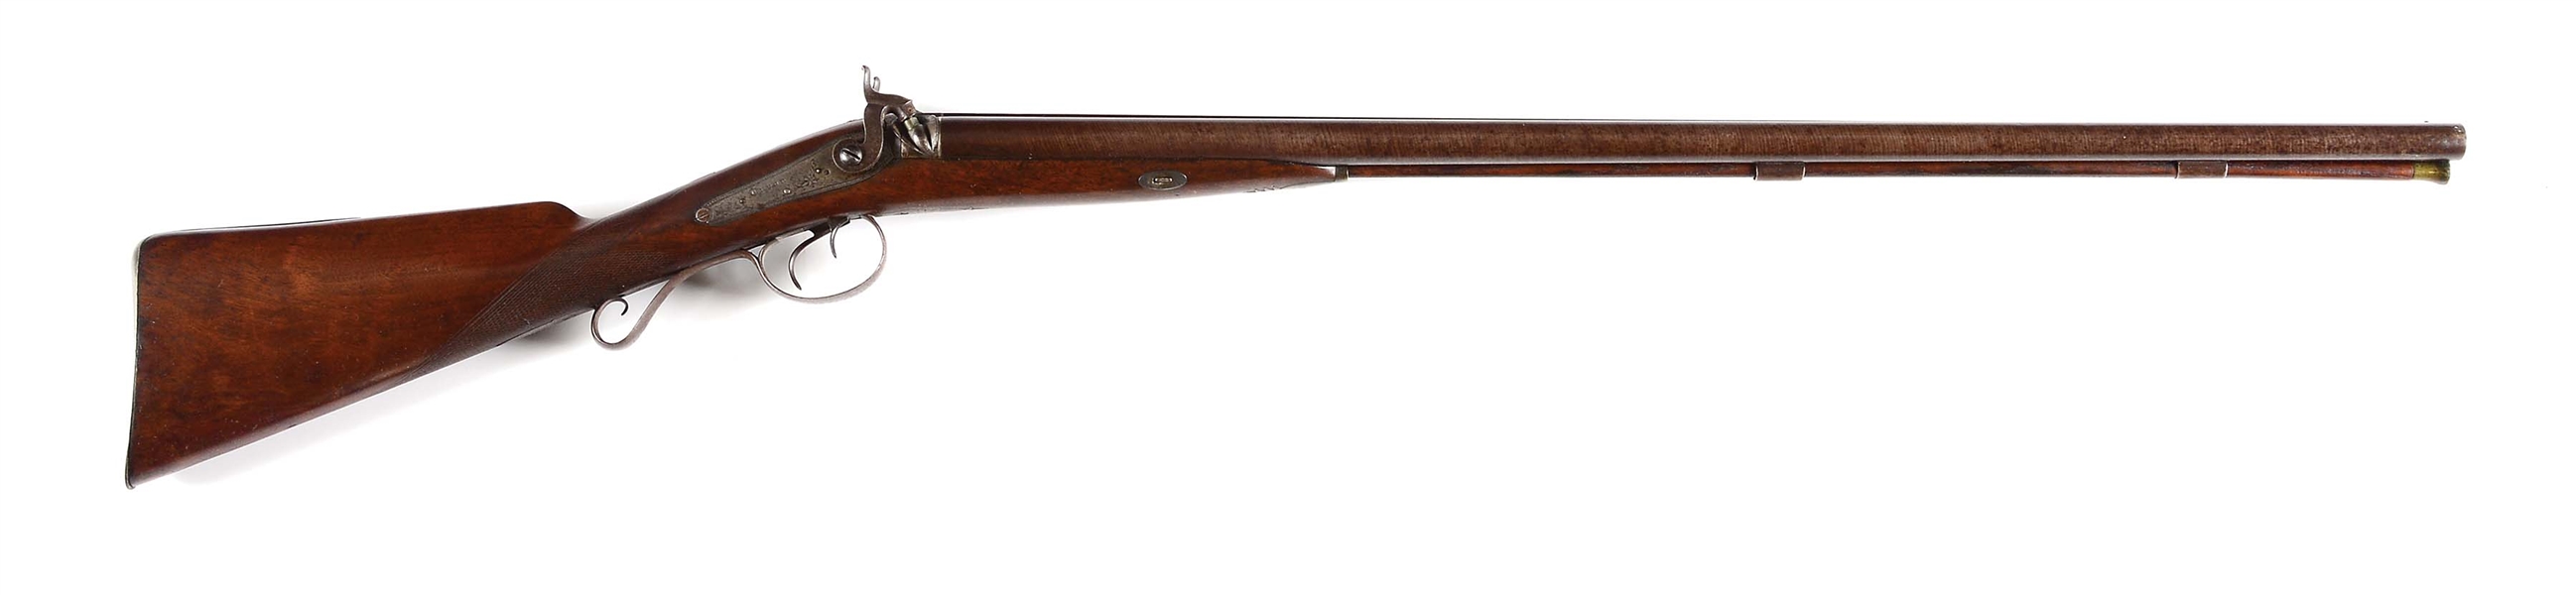 (A) TRYON SIDE BY SIDE MUZZLELOADING 10 BORE PERCUSSION SHOTGUN